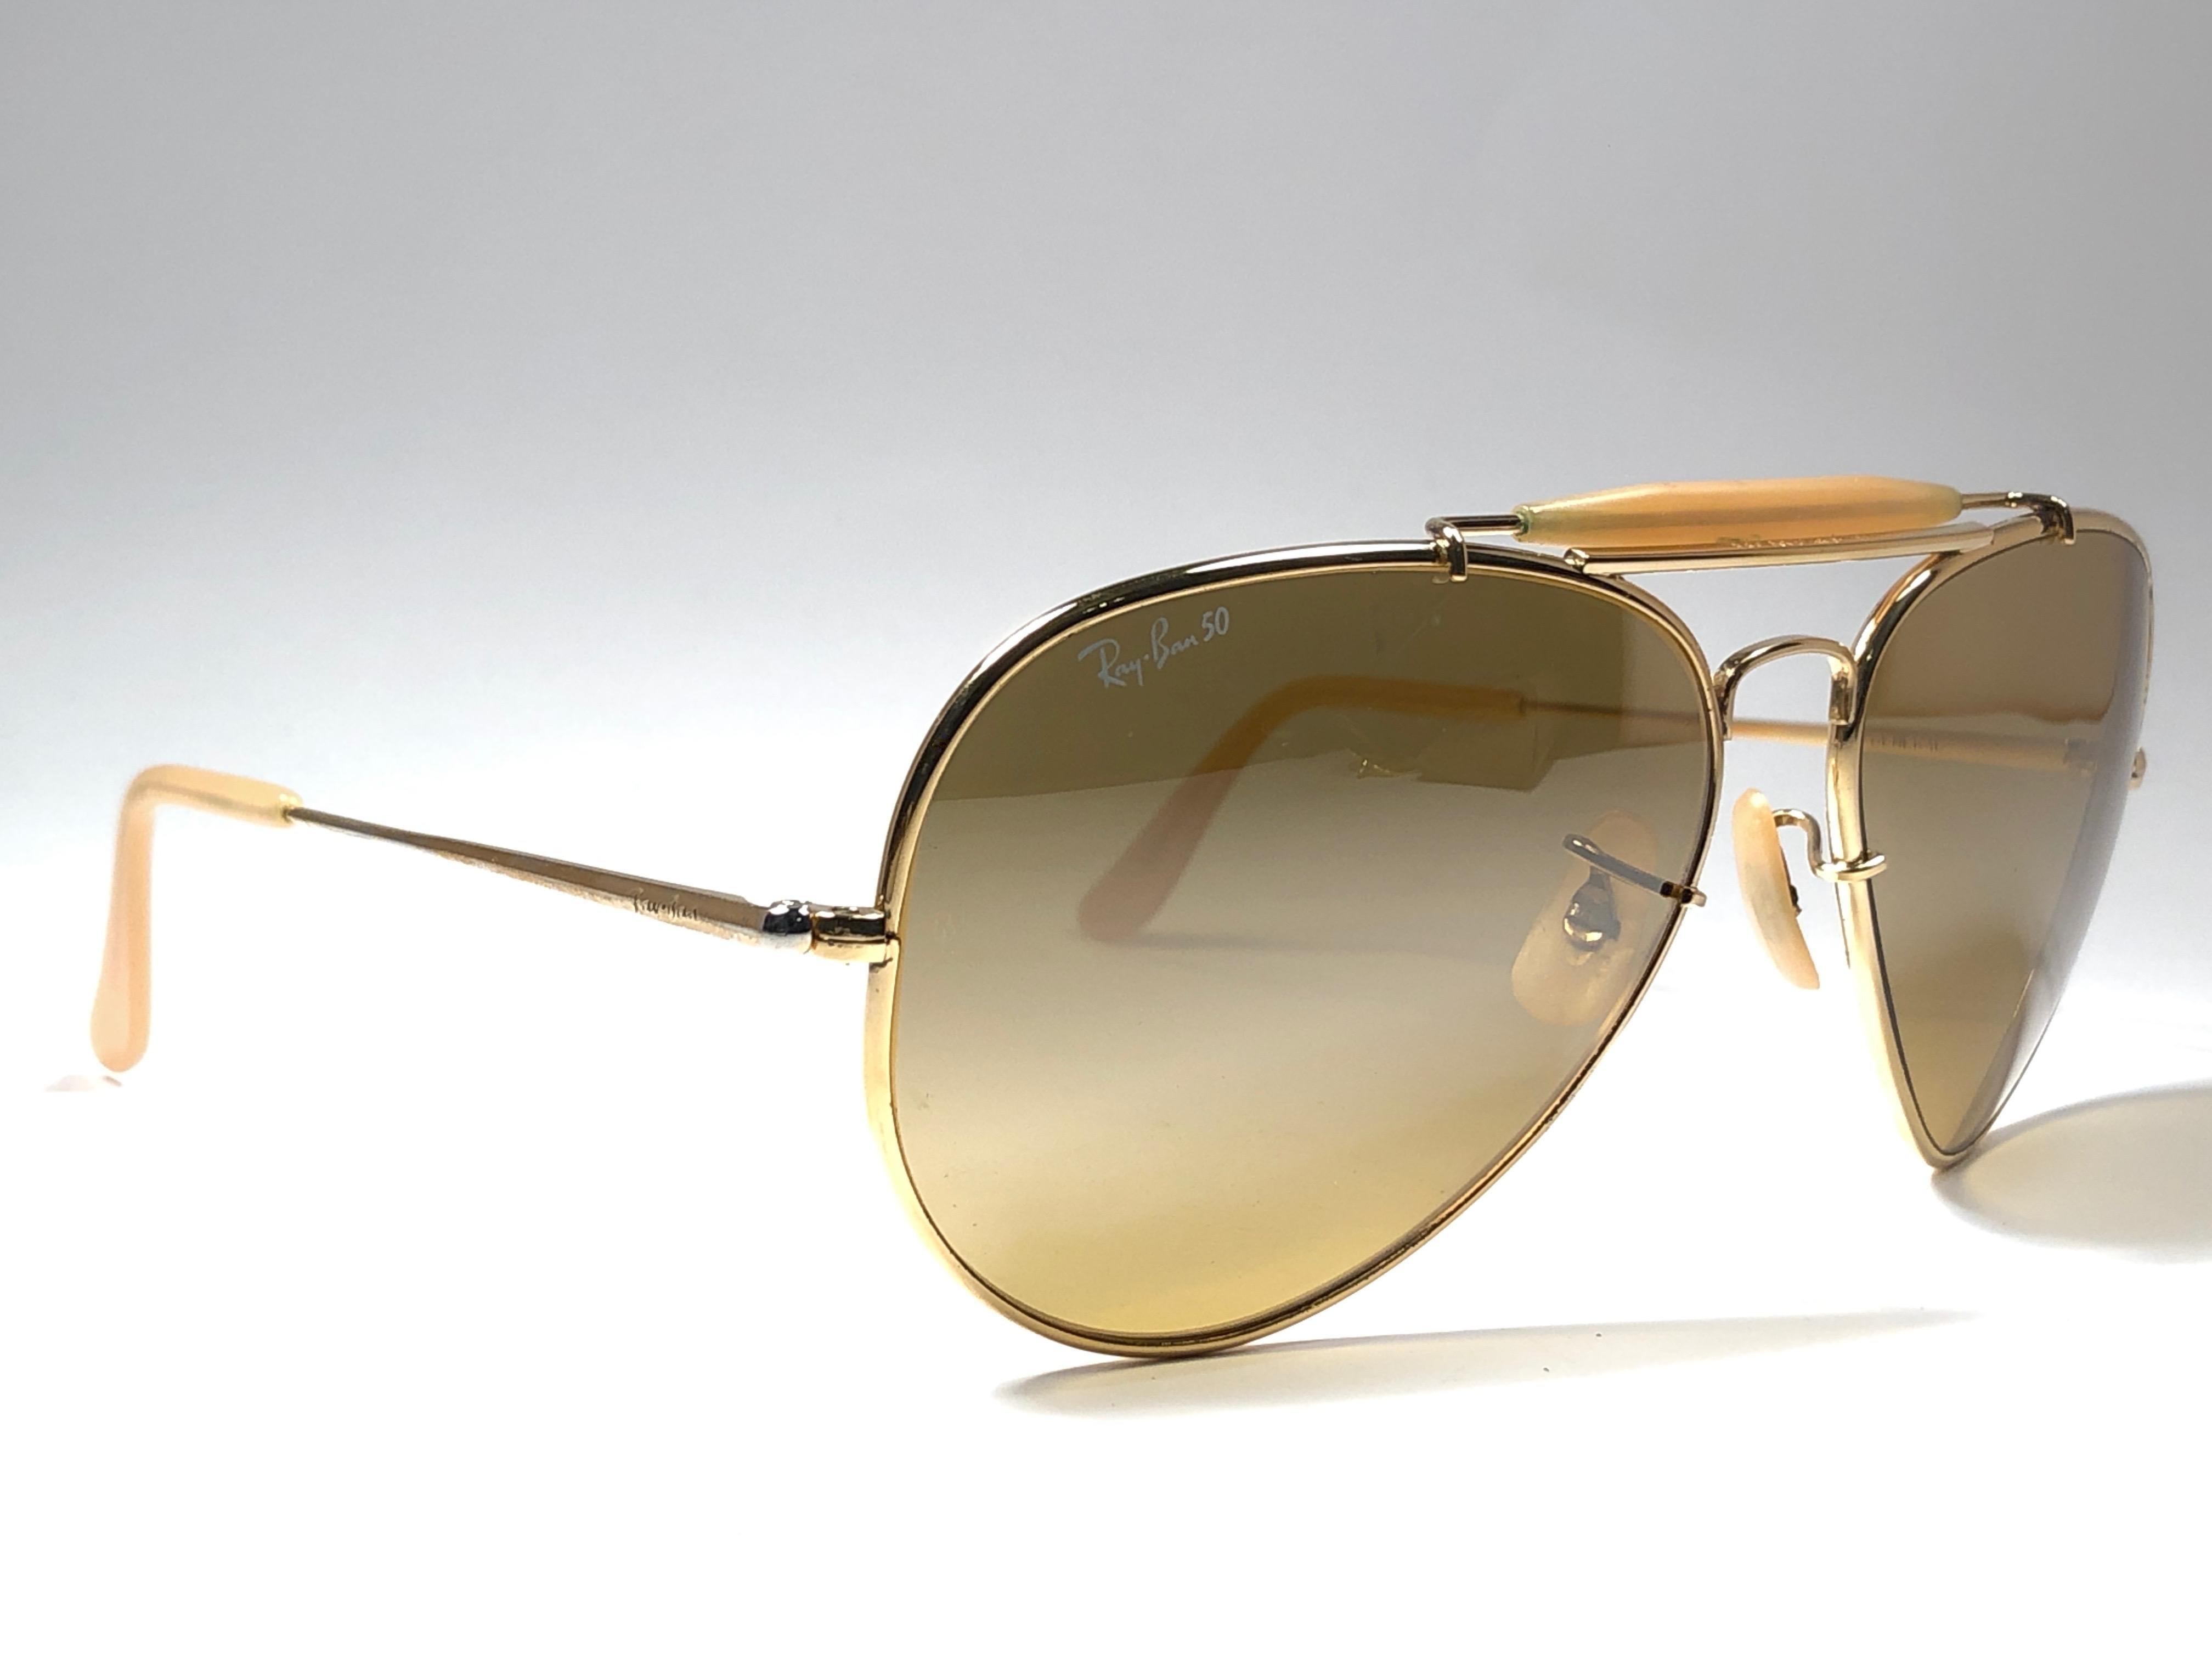 Mint 50th Anniversary Edition 1937-1987 Ray Ban The General Gold Bravura frame with the extra strong temples. 
RB 50 Ambermatic mirror lenses. Ray Ban 50 written on the right lens. B&L Ray Ban Usa. Under the bridge 62 [] 14. Comes with original